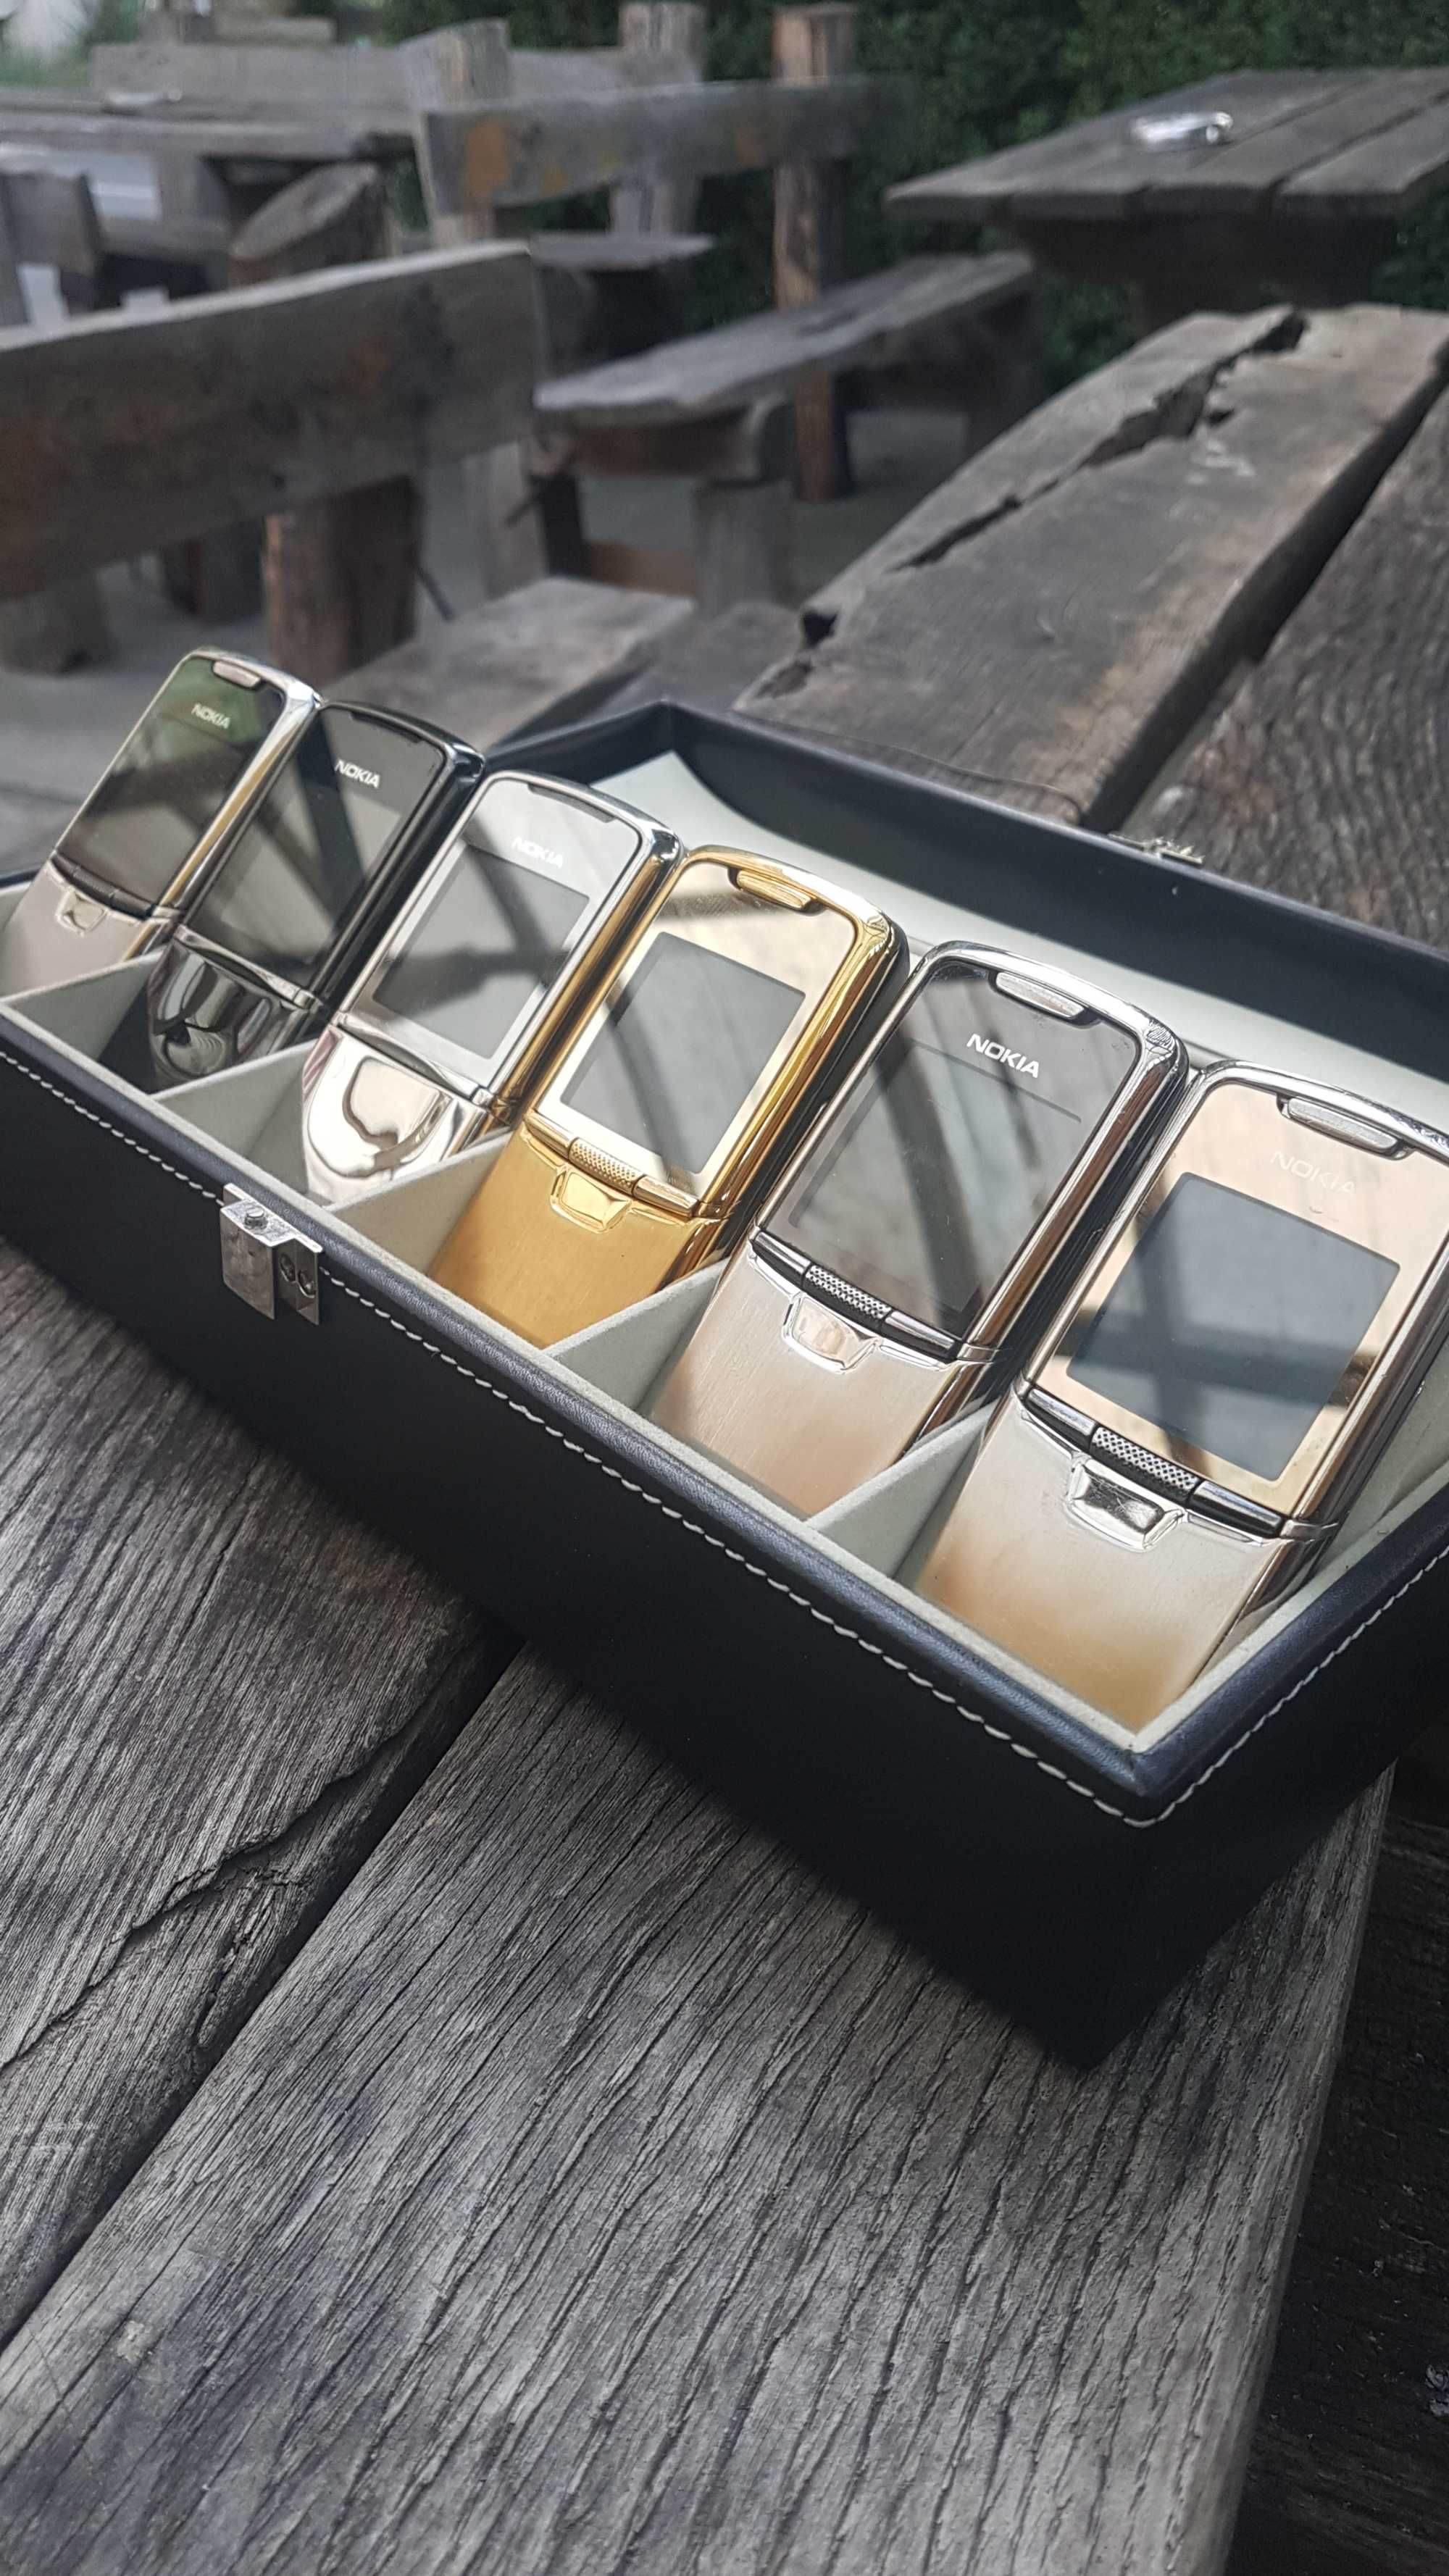 Nokia 8800  Gold, Silver,Black  Special Limitted Edition 3 броя